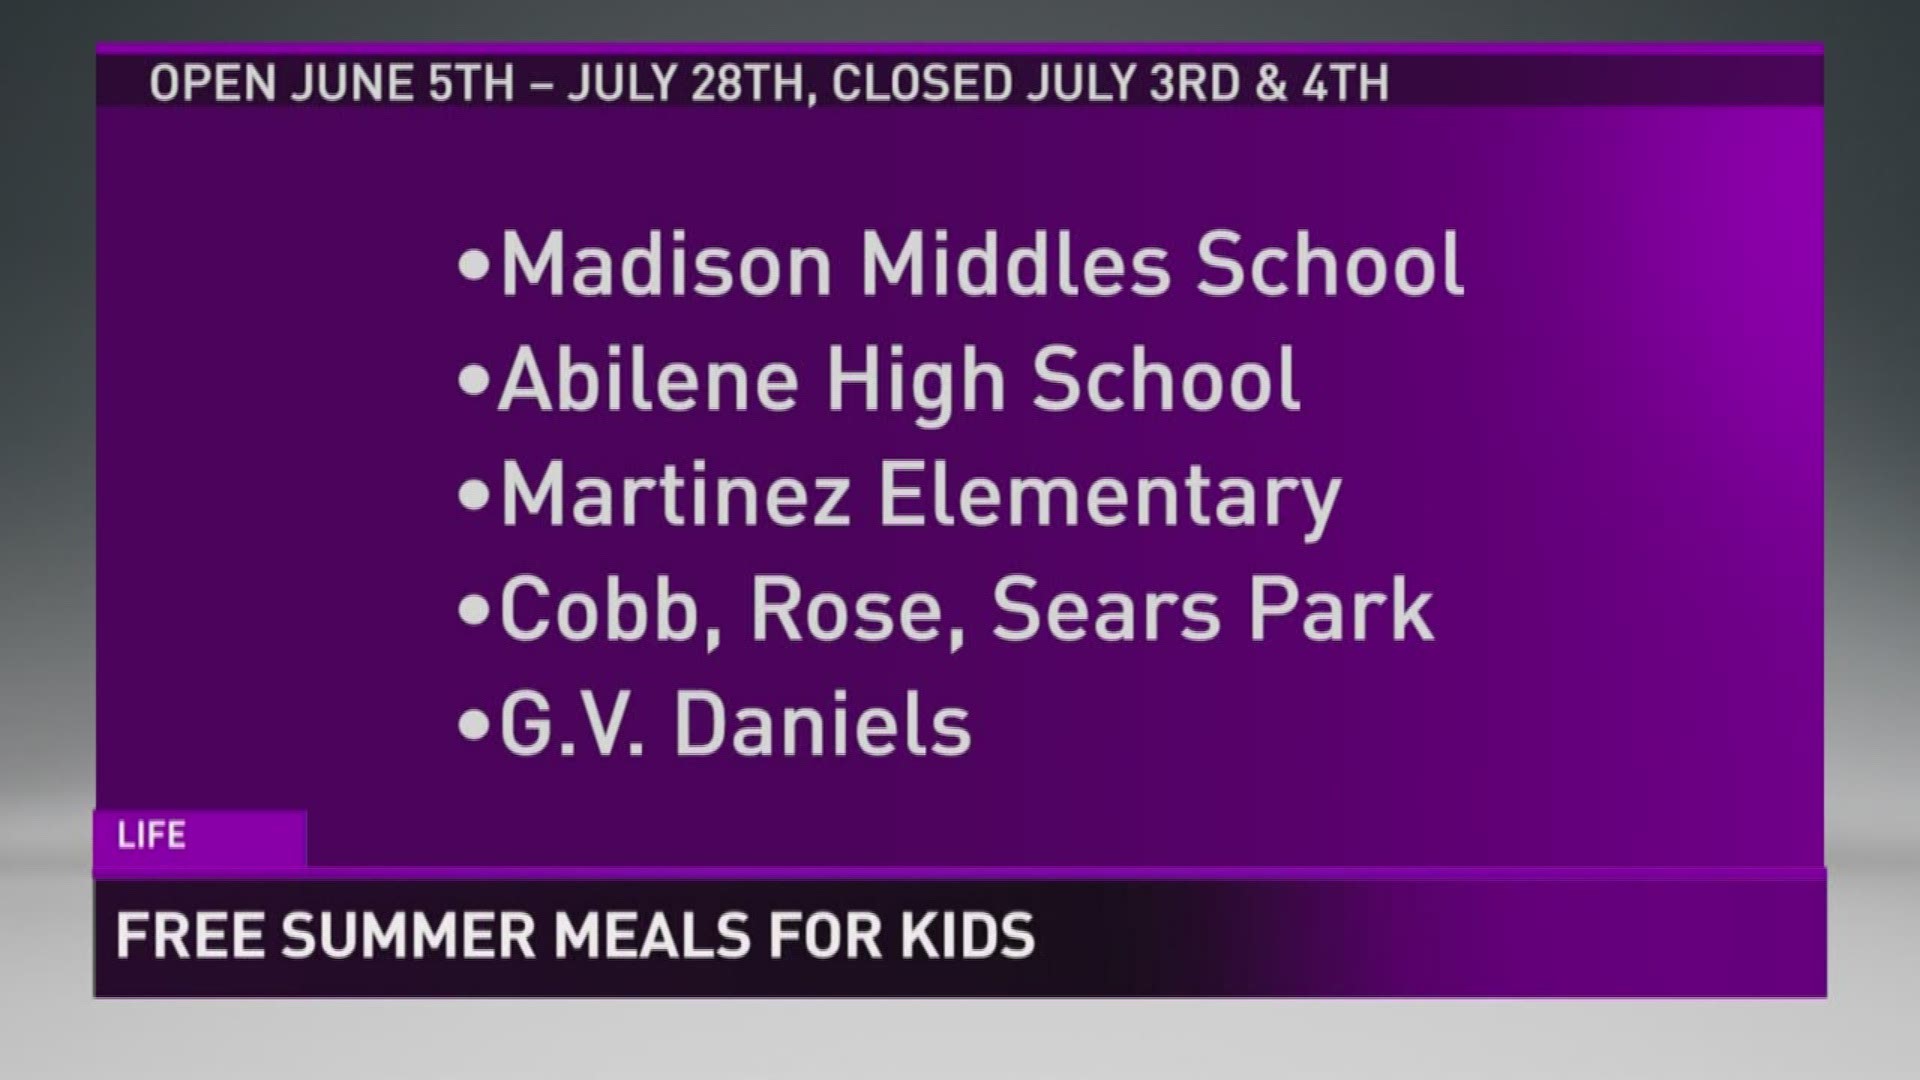 The Abilene ISD will be offering free summer meals for kids and teens.